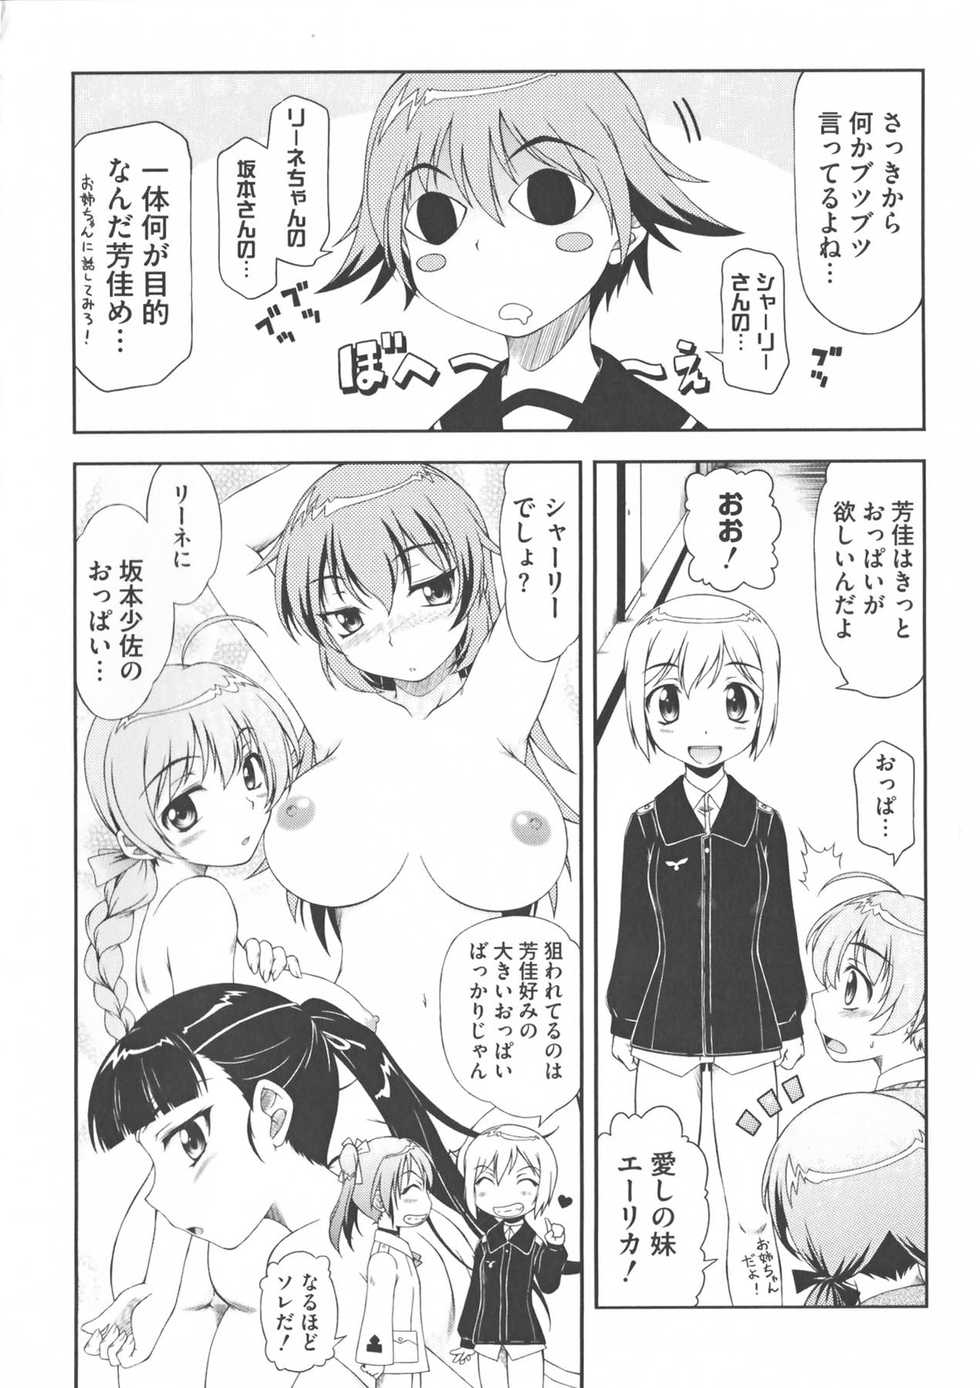 [Anthology] Strike Ecchies (Strike Witches) - Page 8